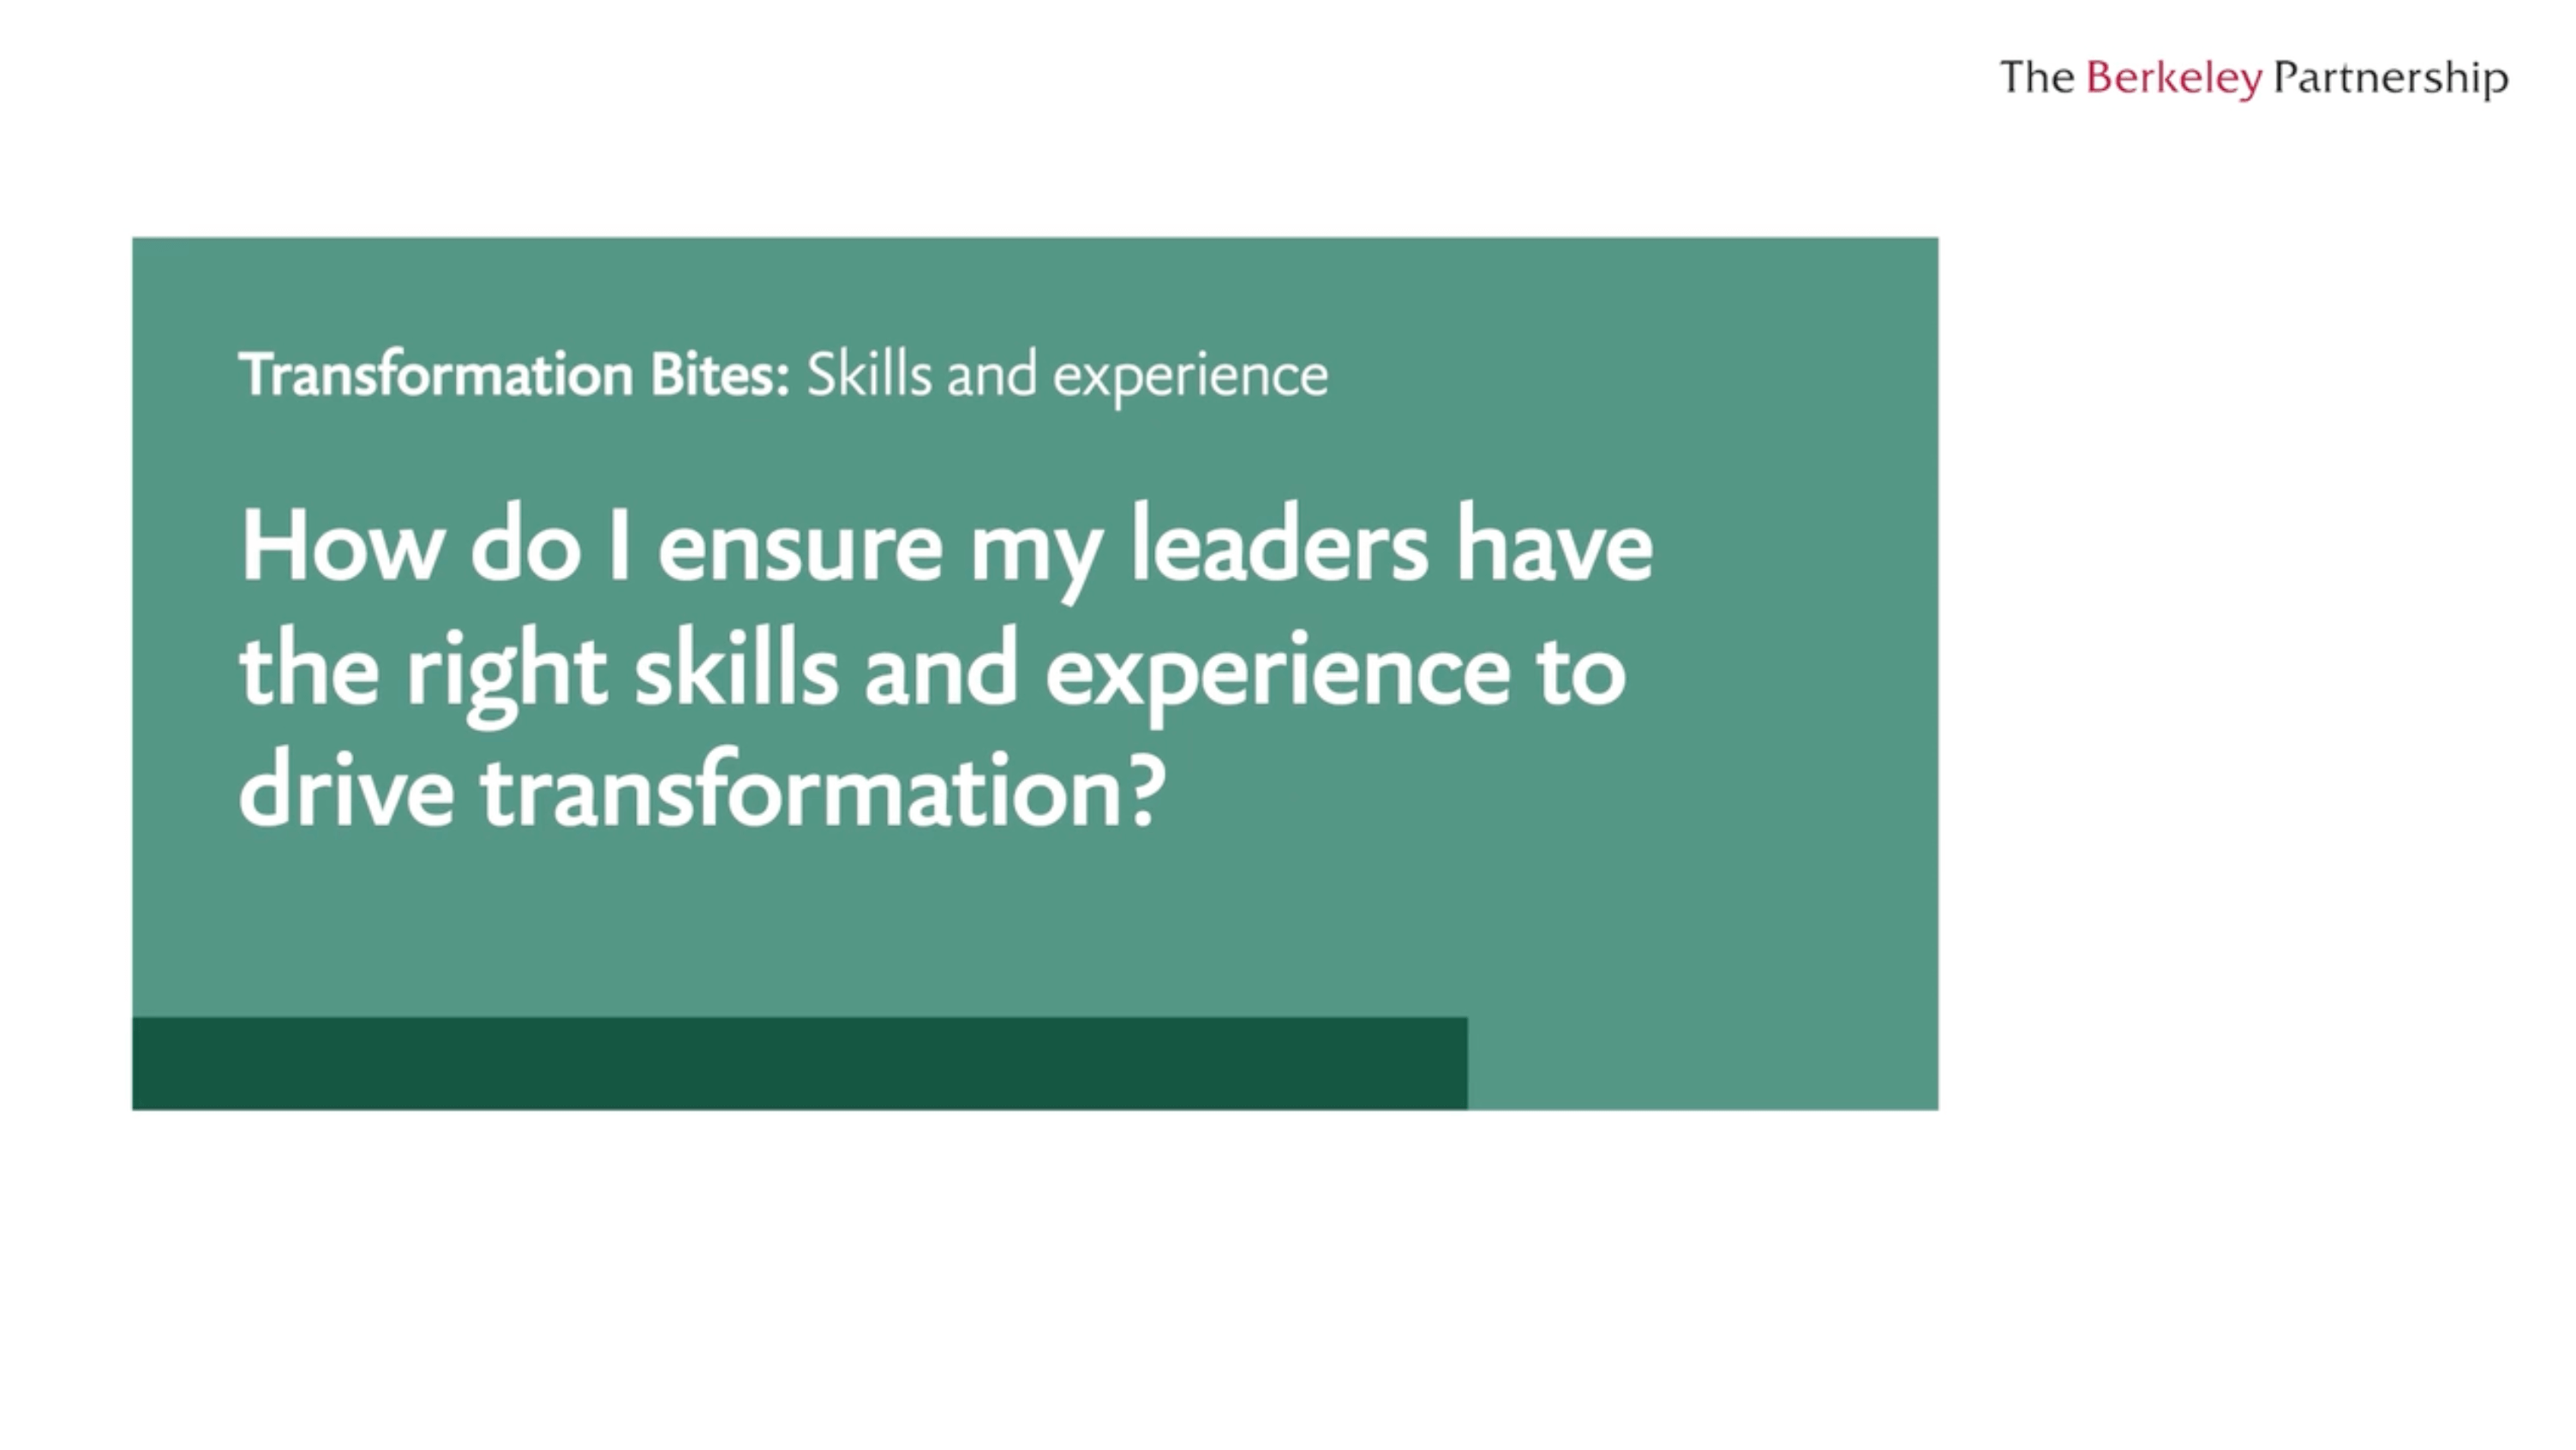 How do I ensure my leaders have the right skills to drive transformation?